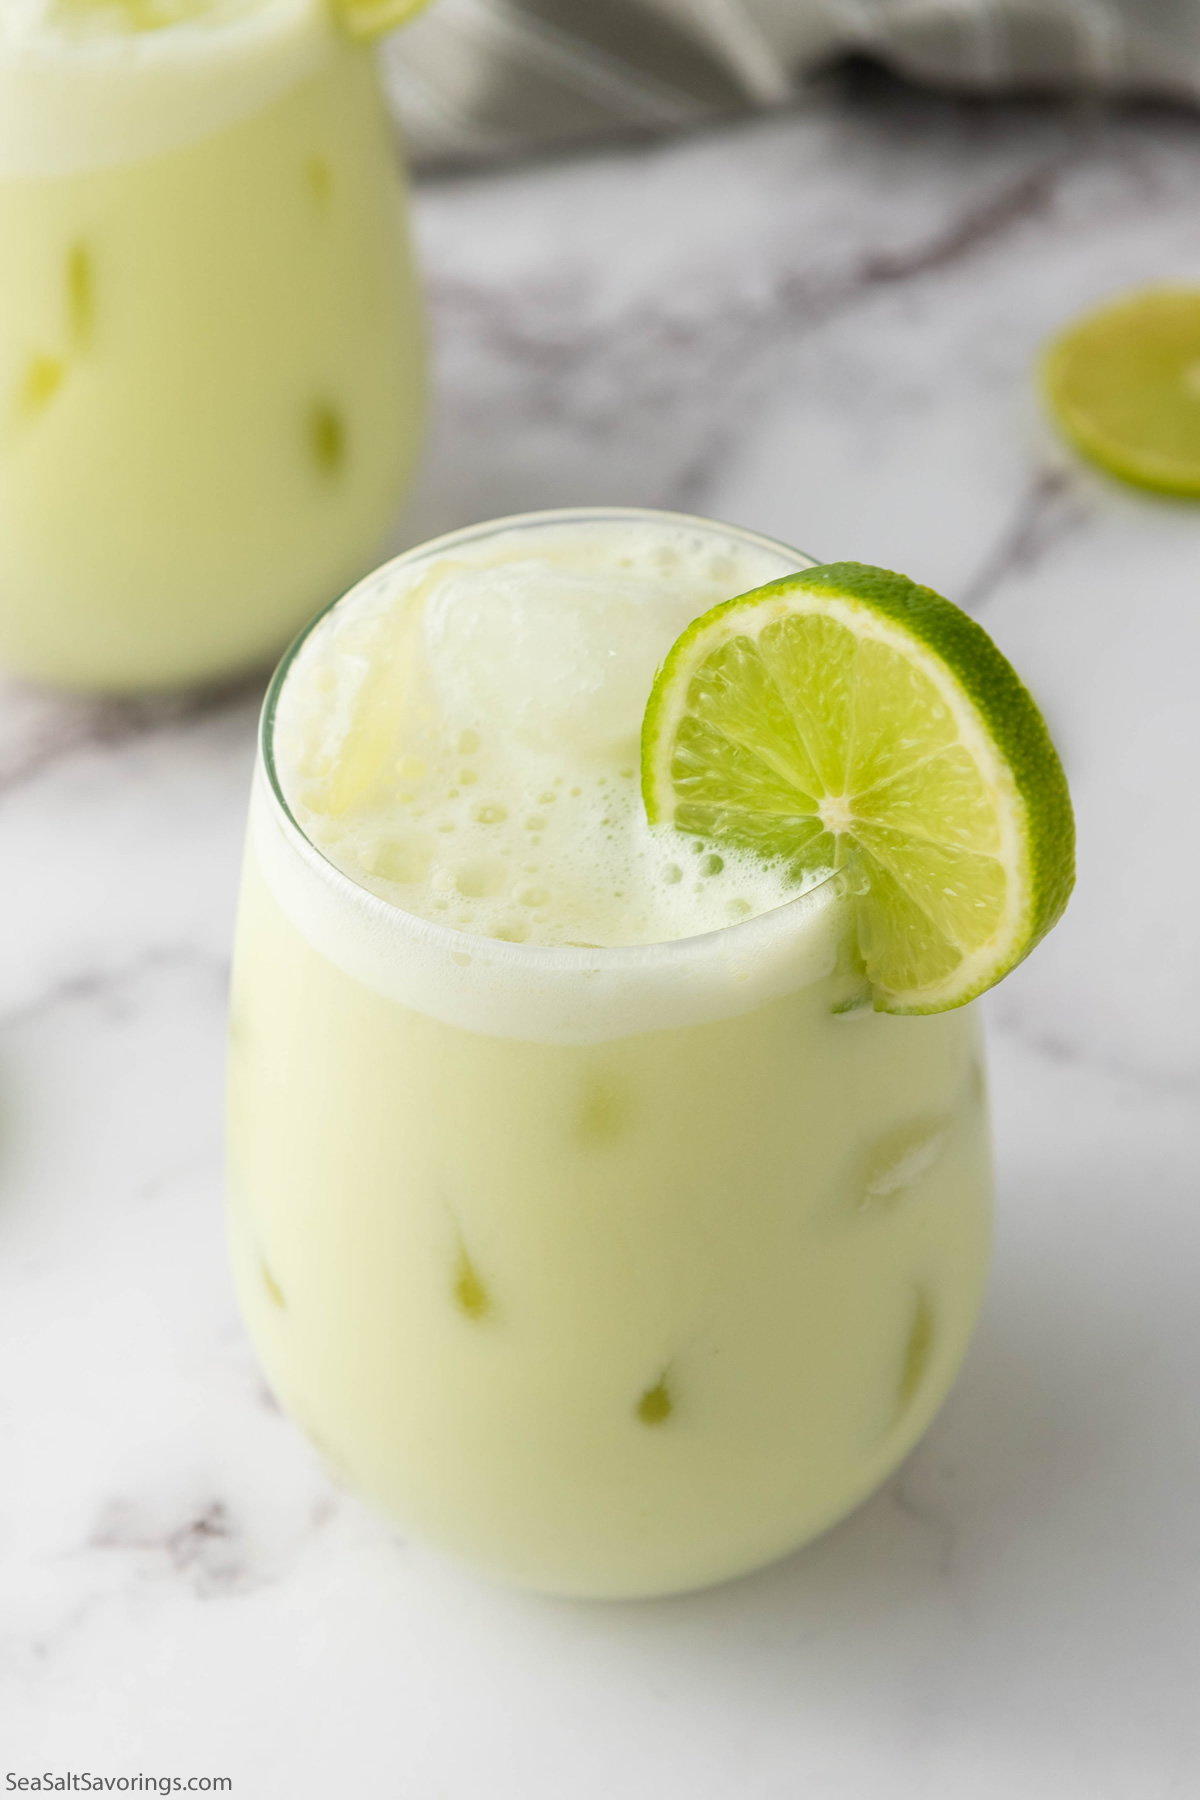 glass of limeade with a lime garnish on the rim of the glass